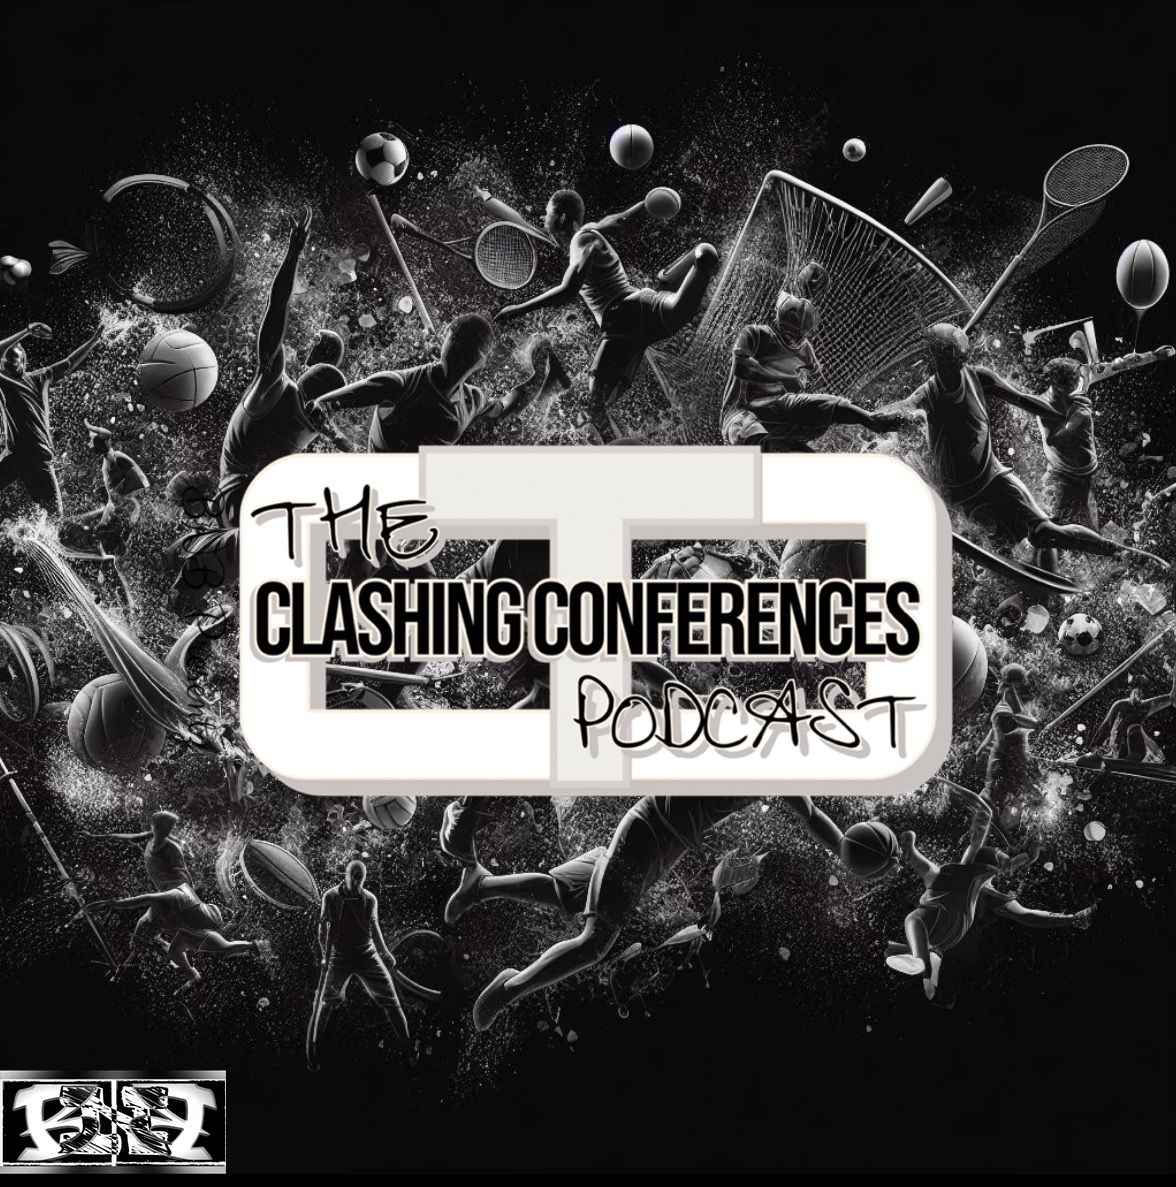 The Clashing Conferences Podcast